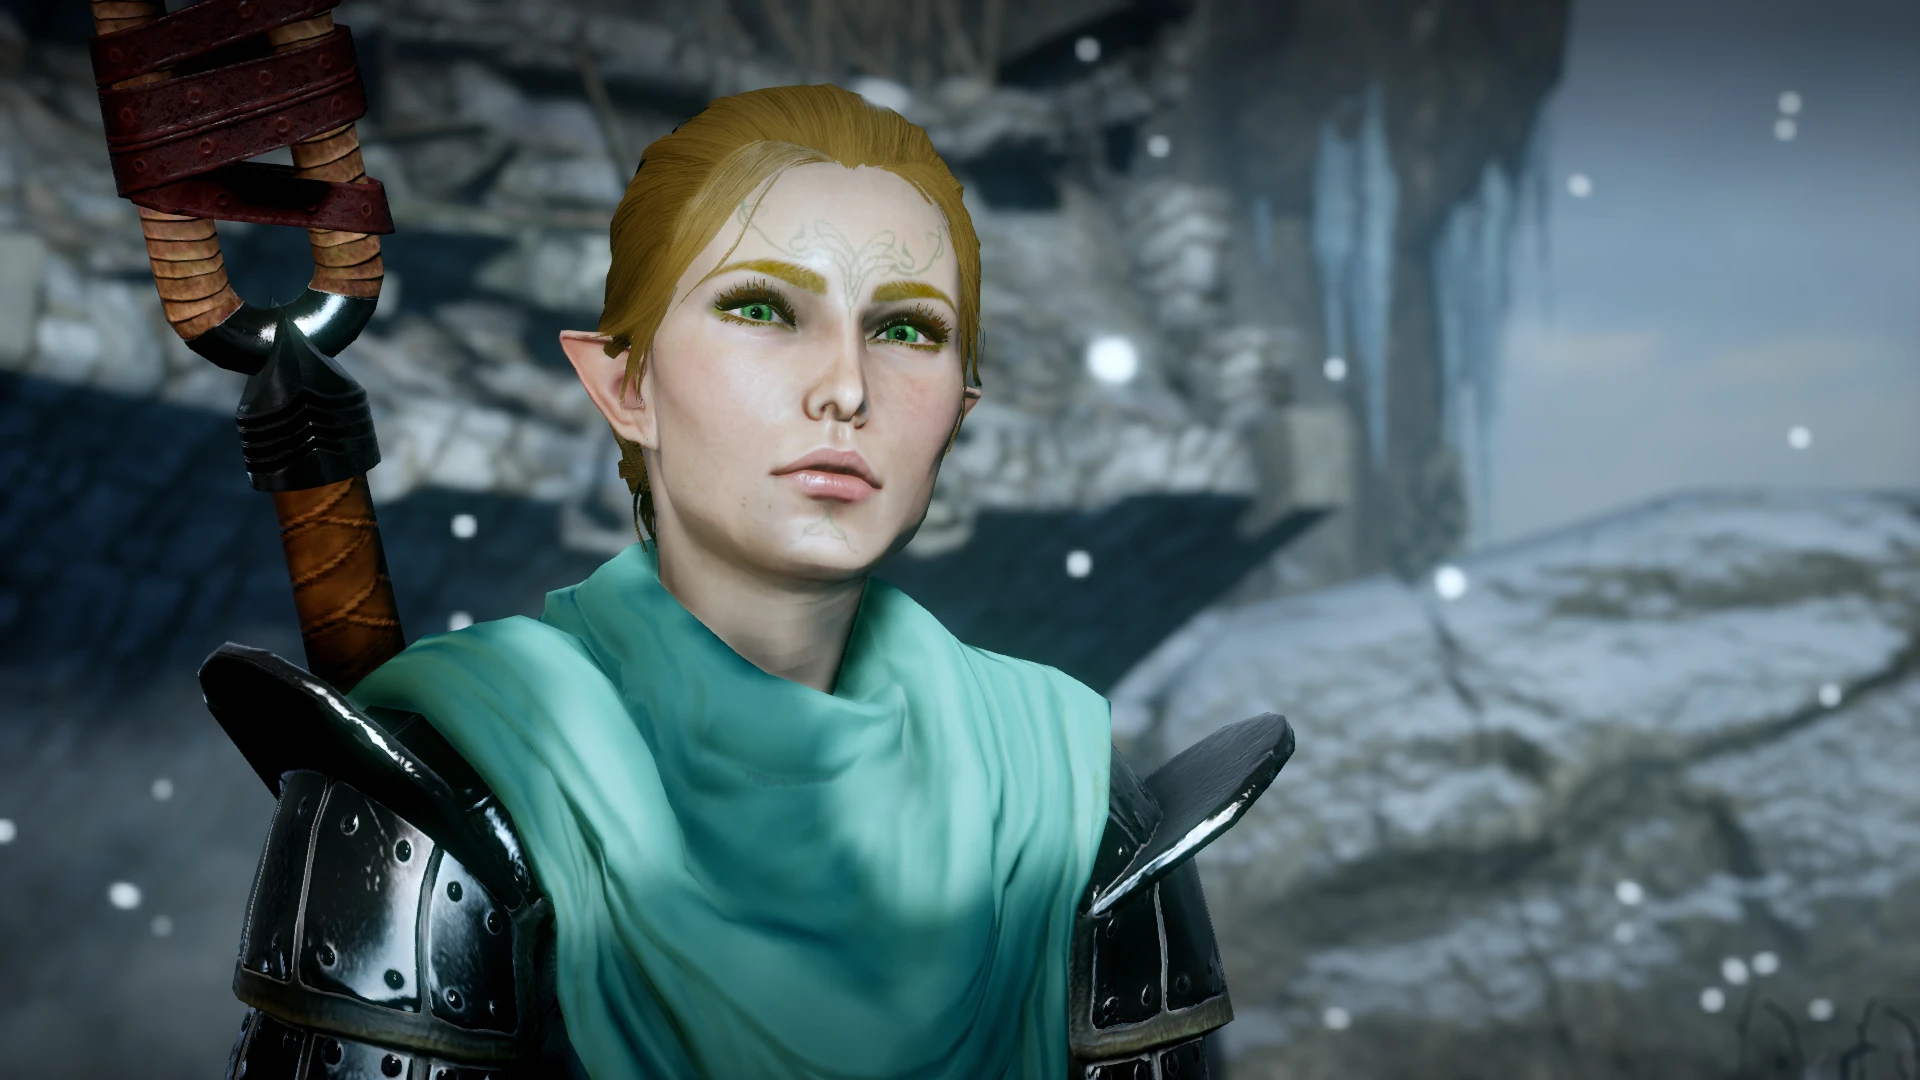 mod manager dragon age inquisition